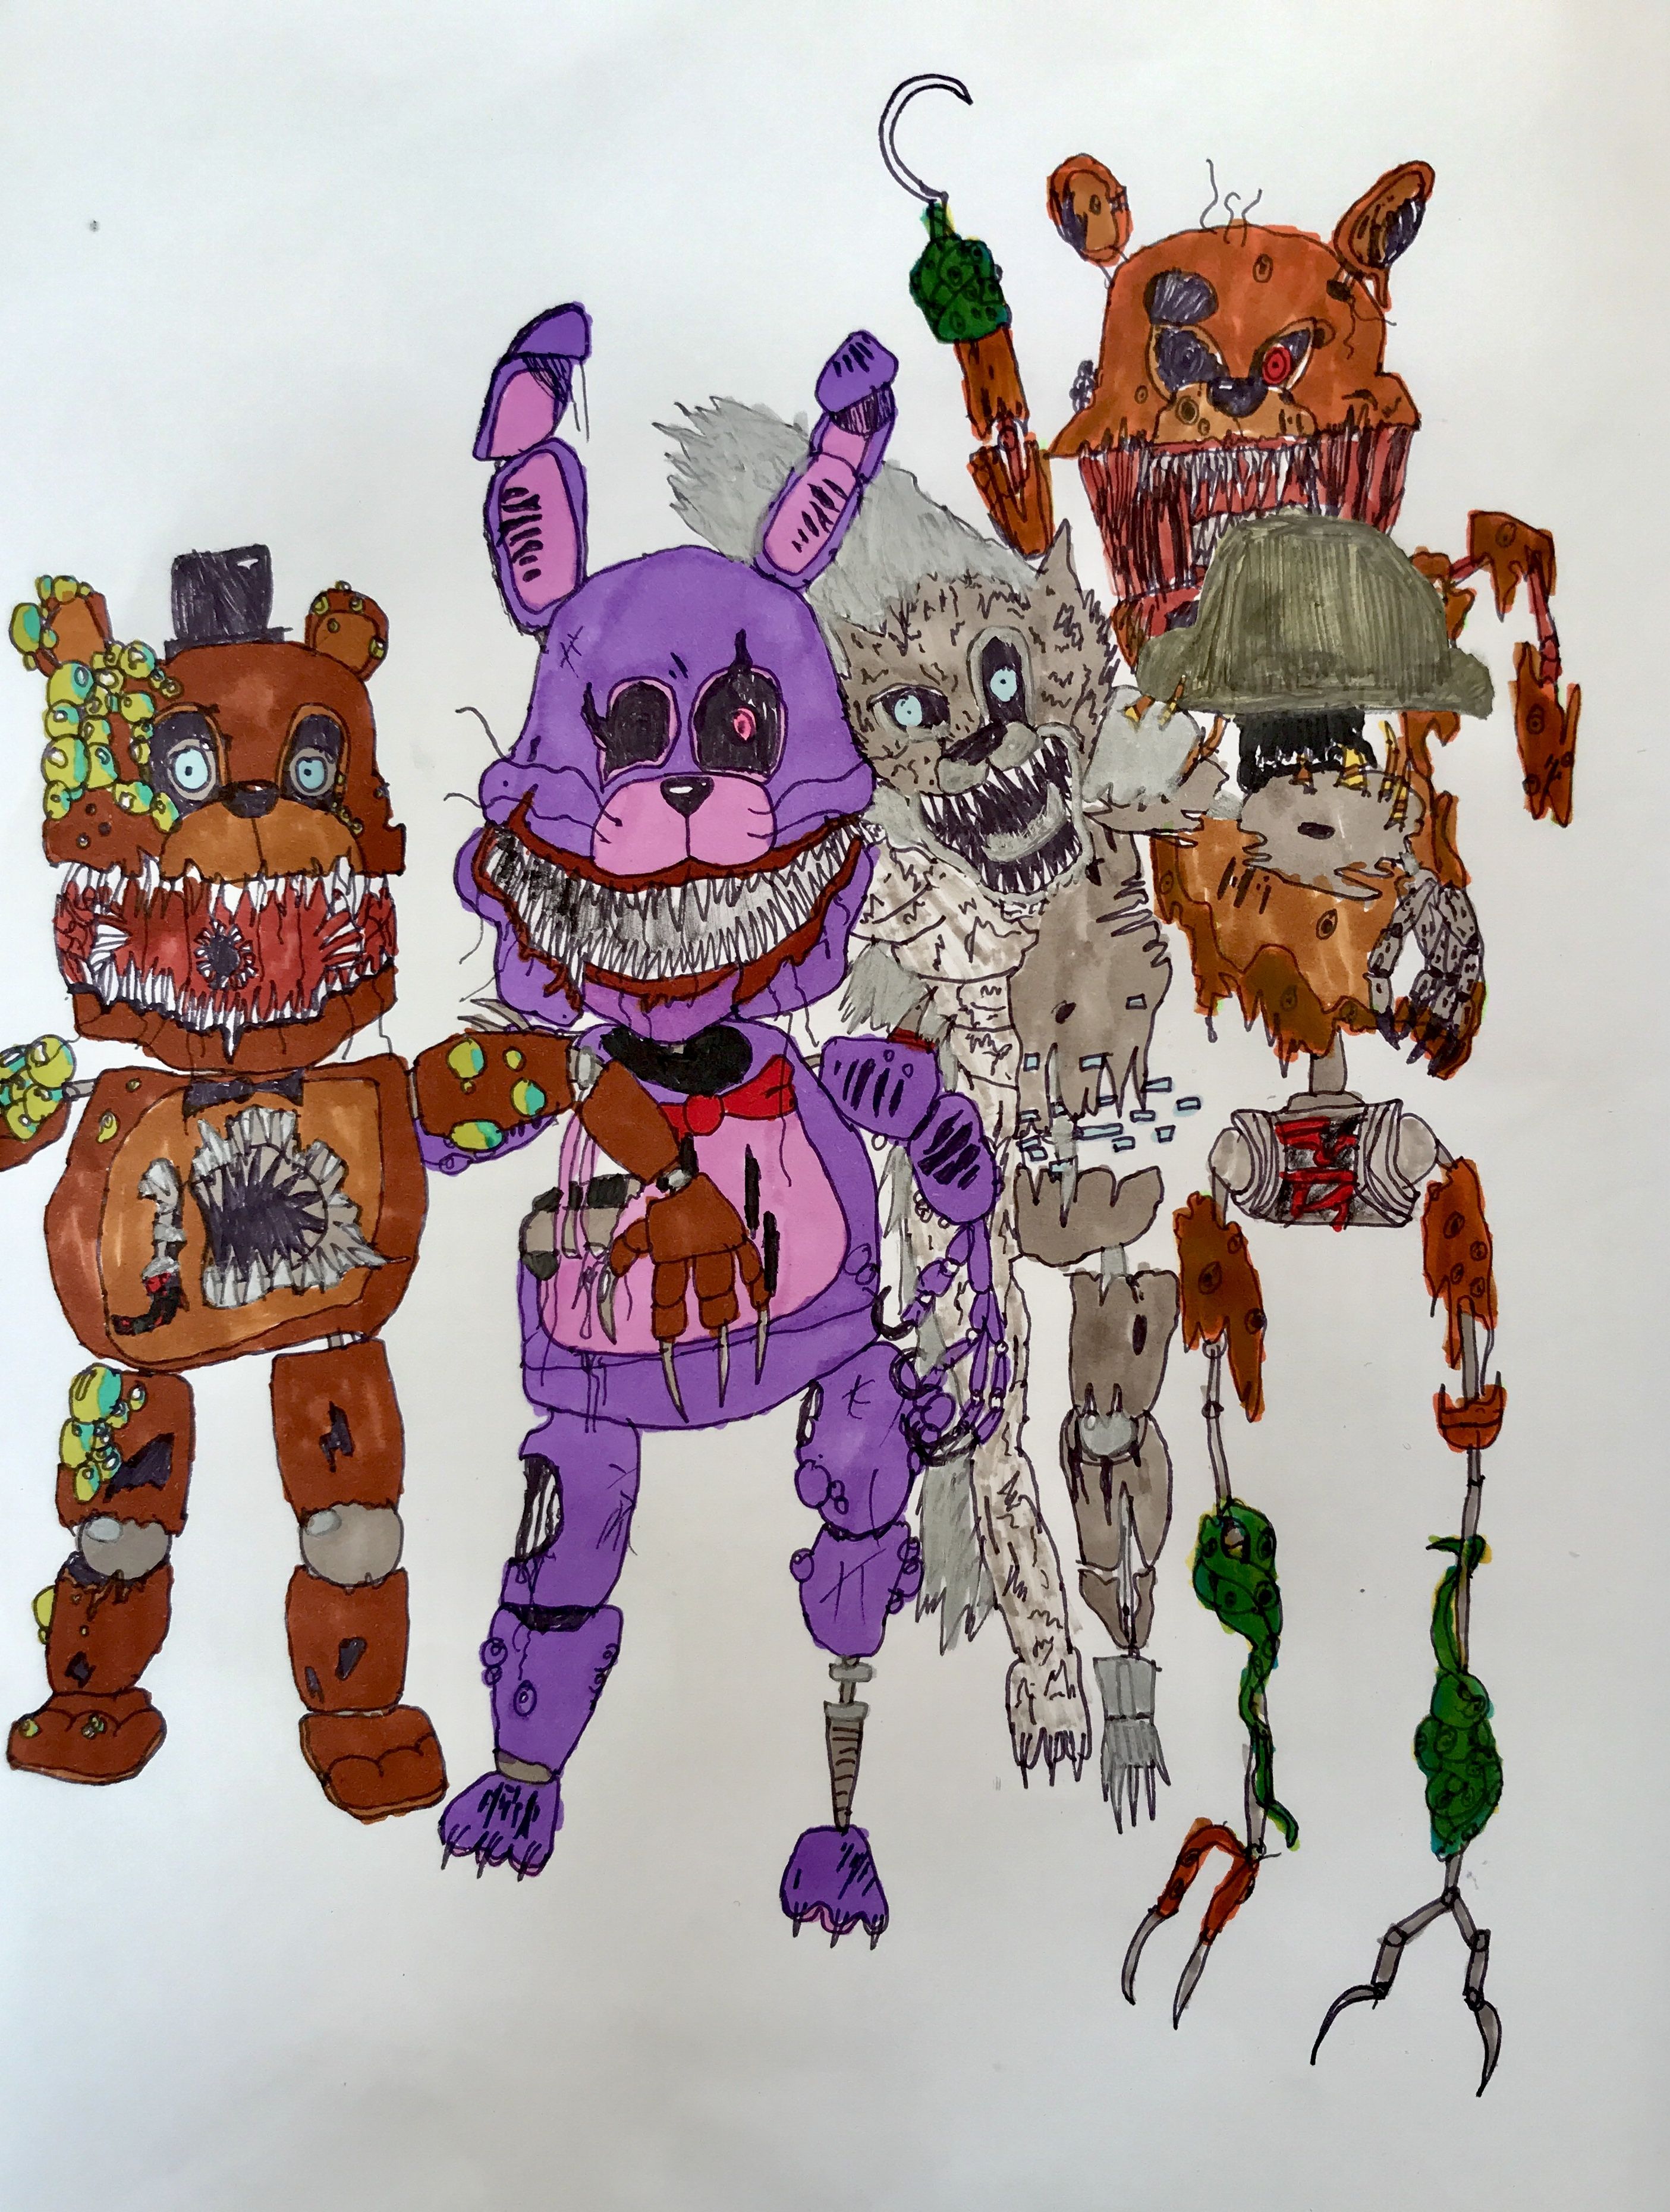 THE TWISTED ONES Nights at Freddy's Photo